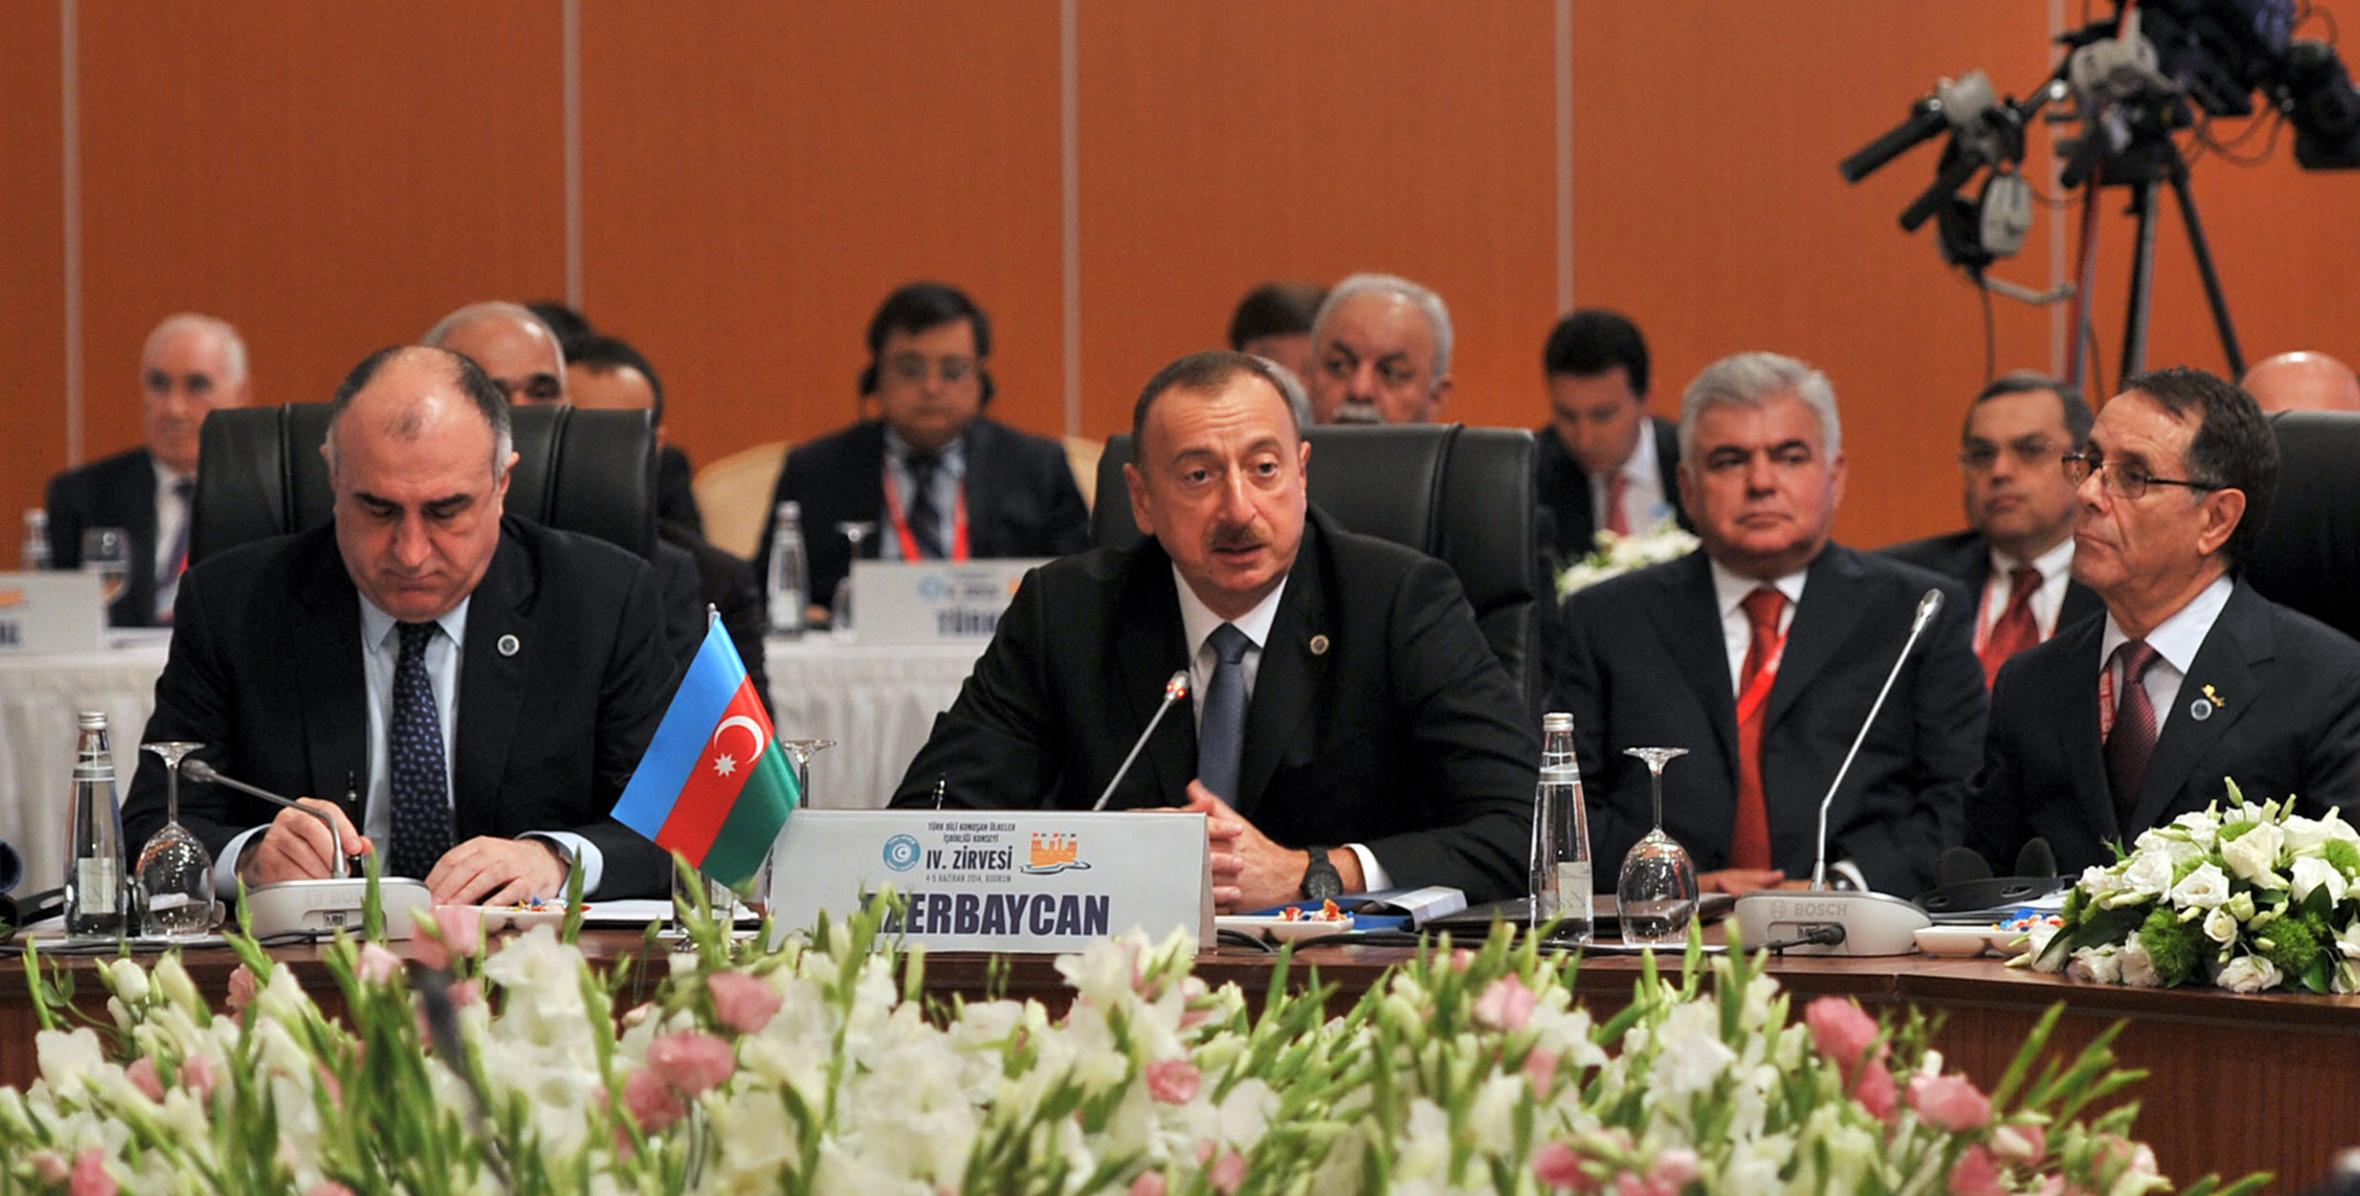 Speech by Ilham Aliyev at the Fourth Summit of the Cooperation Council of Turkic-speaking States